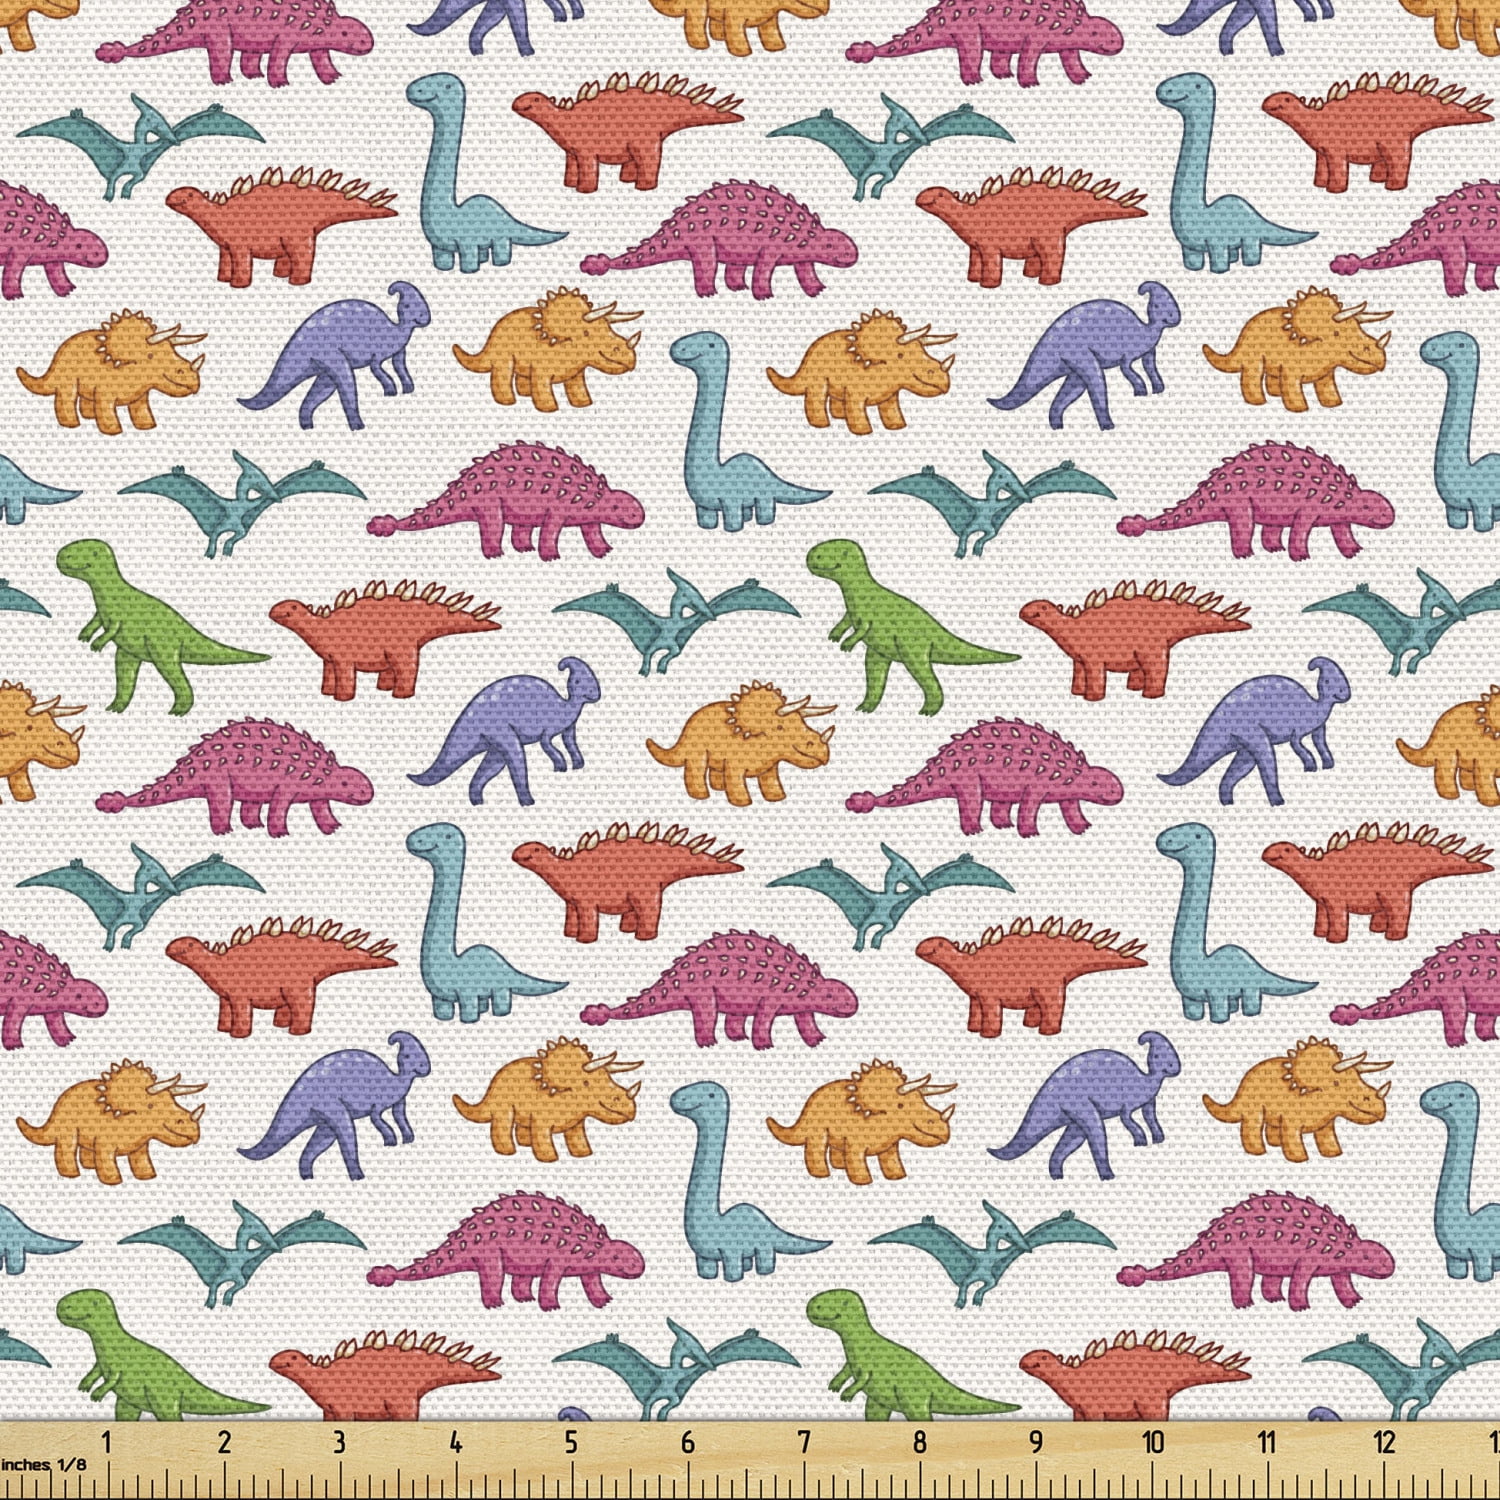 Dinosaur Fabric by the Yard Upholstery, Variety of Dinosaurs in Colorful  Cartoon Style Archeology Pattern Summer, Decorative Fabric for DIY and Home  Accents, 3 Yards, Multicolor by Ambesonne 